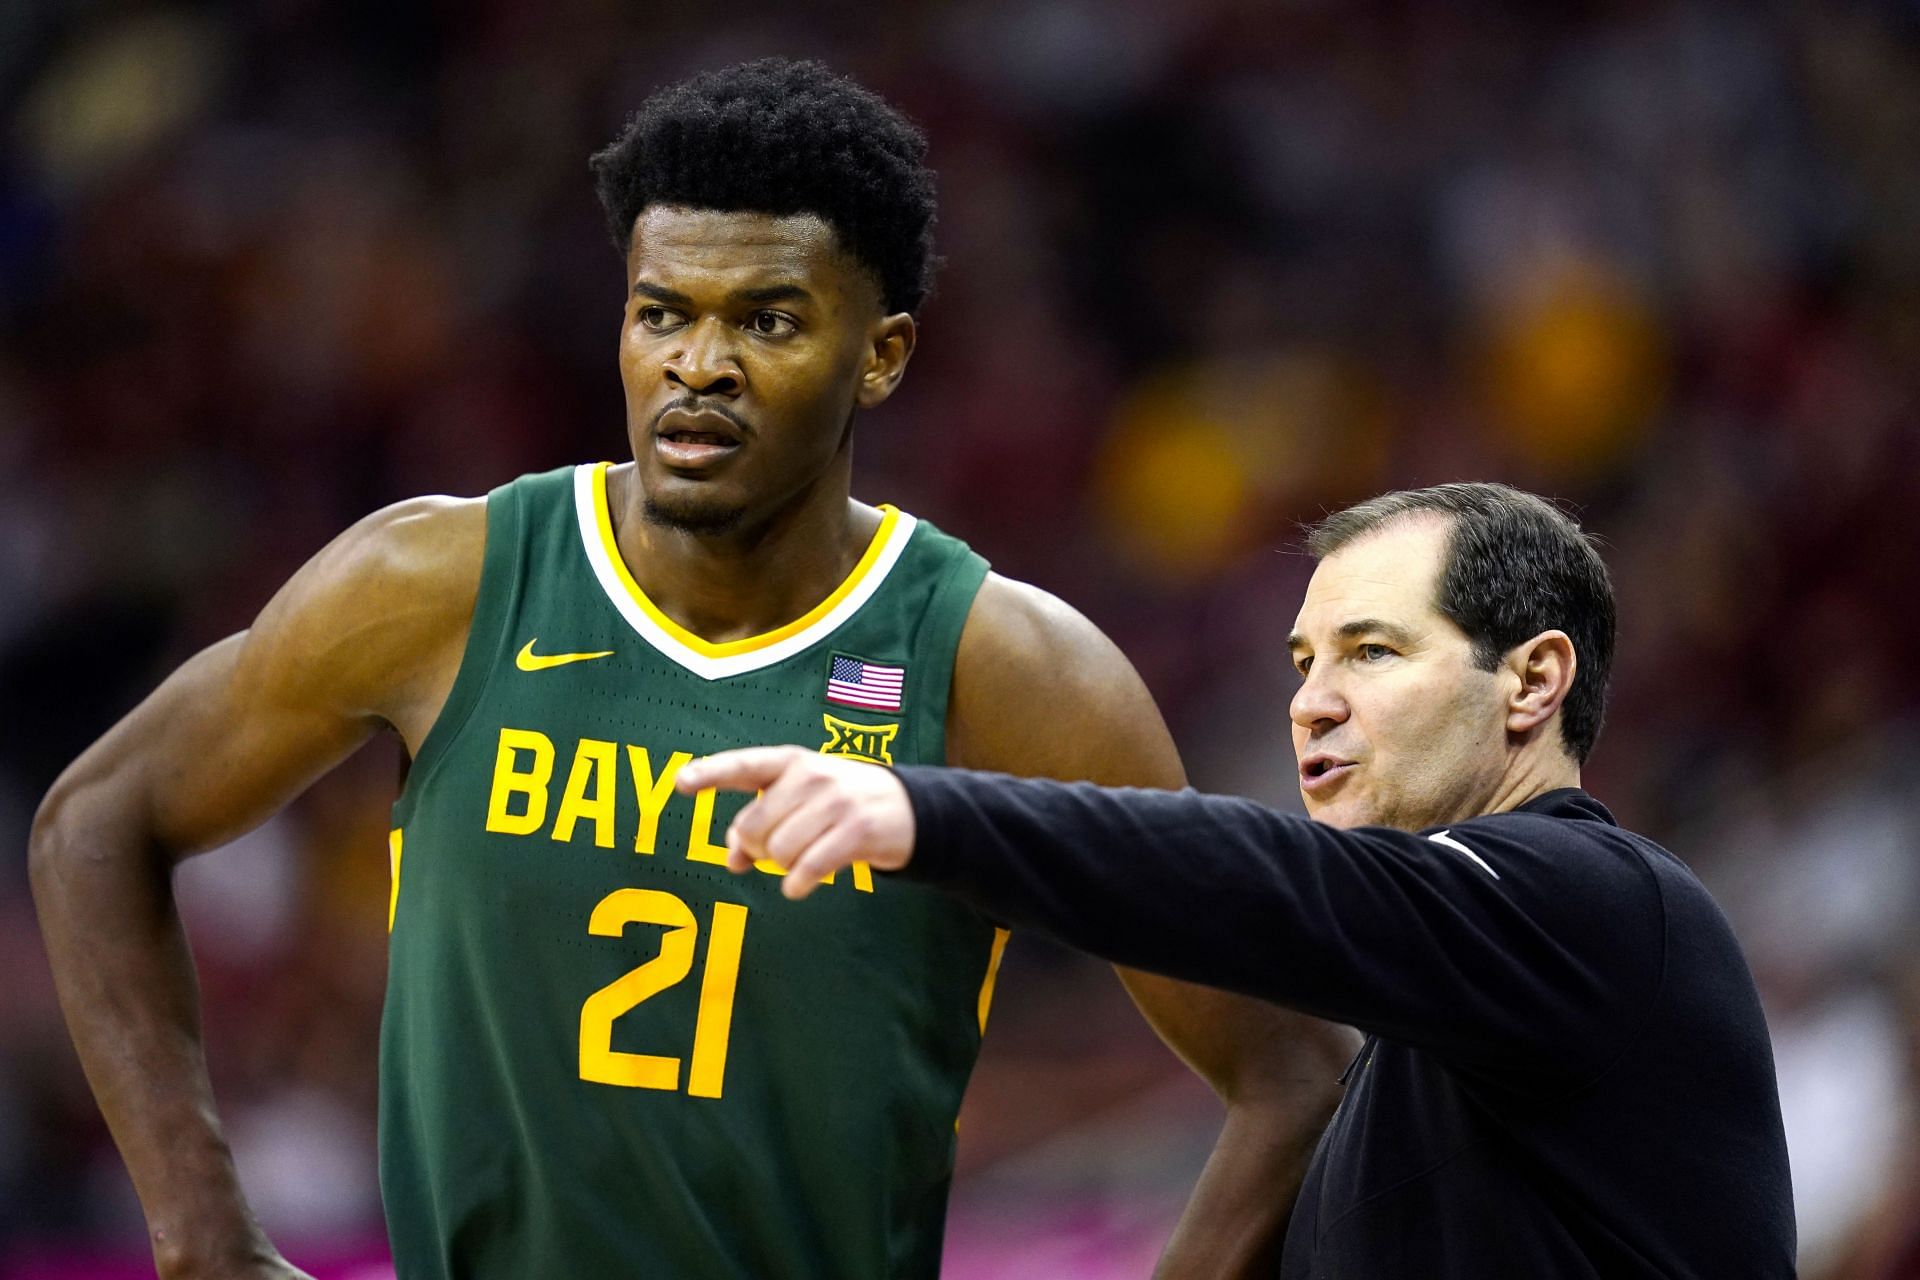 Drew has guided Baylor to four consecutive NCAA Tournament appearances.